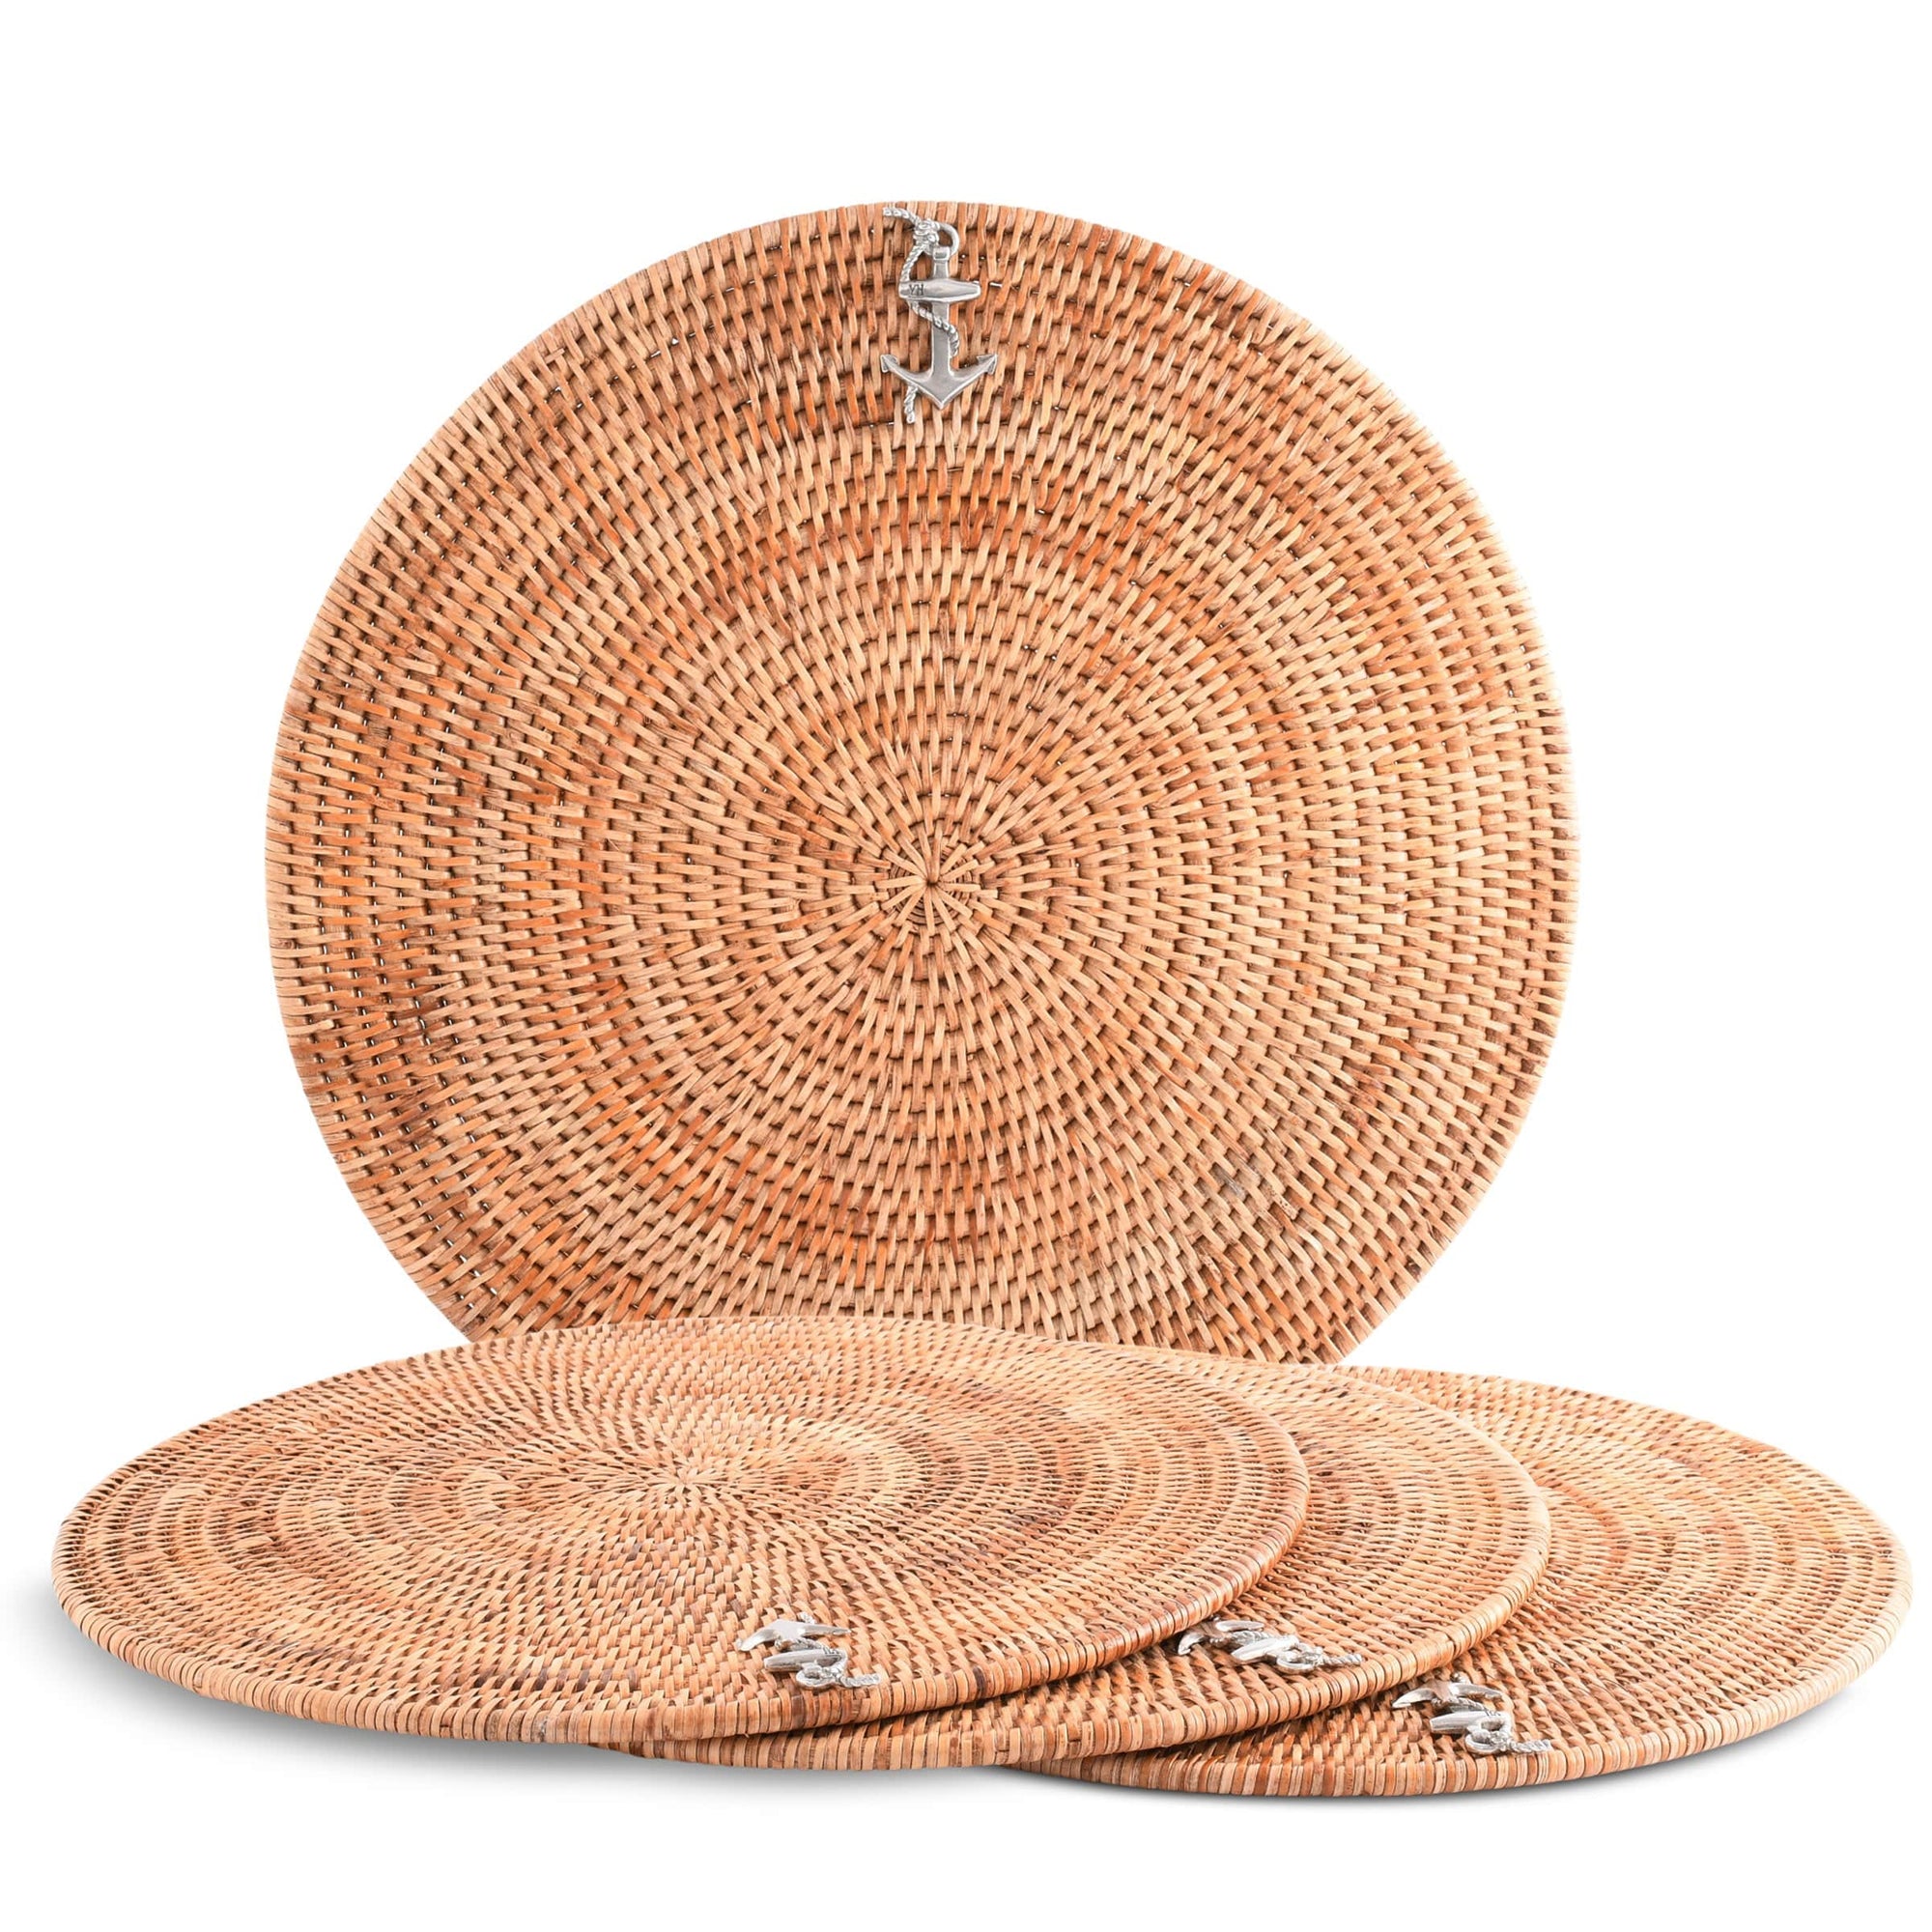 Vagabond House Sea and Shore Anchor Placemat Hand Woven Wicker Rattan Round - Set of 4